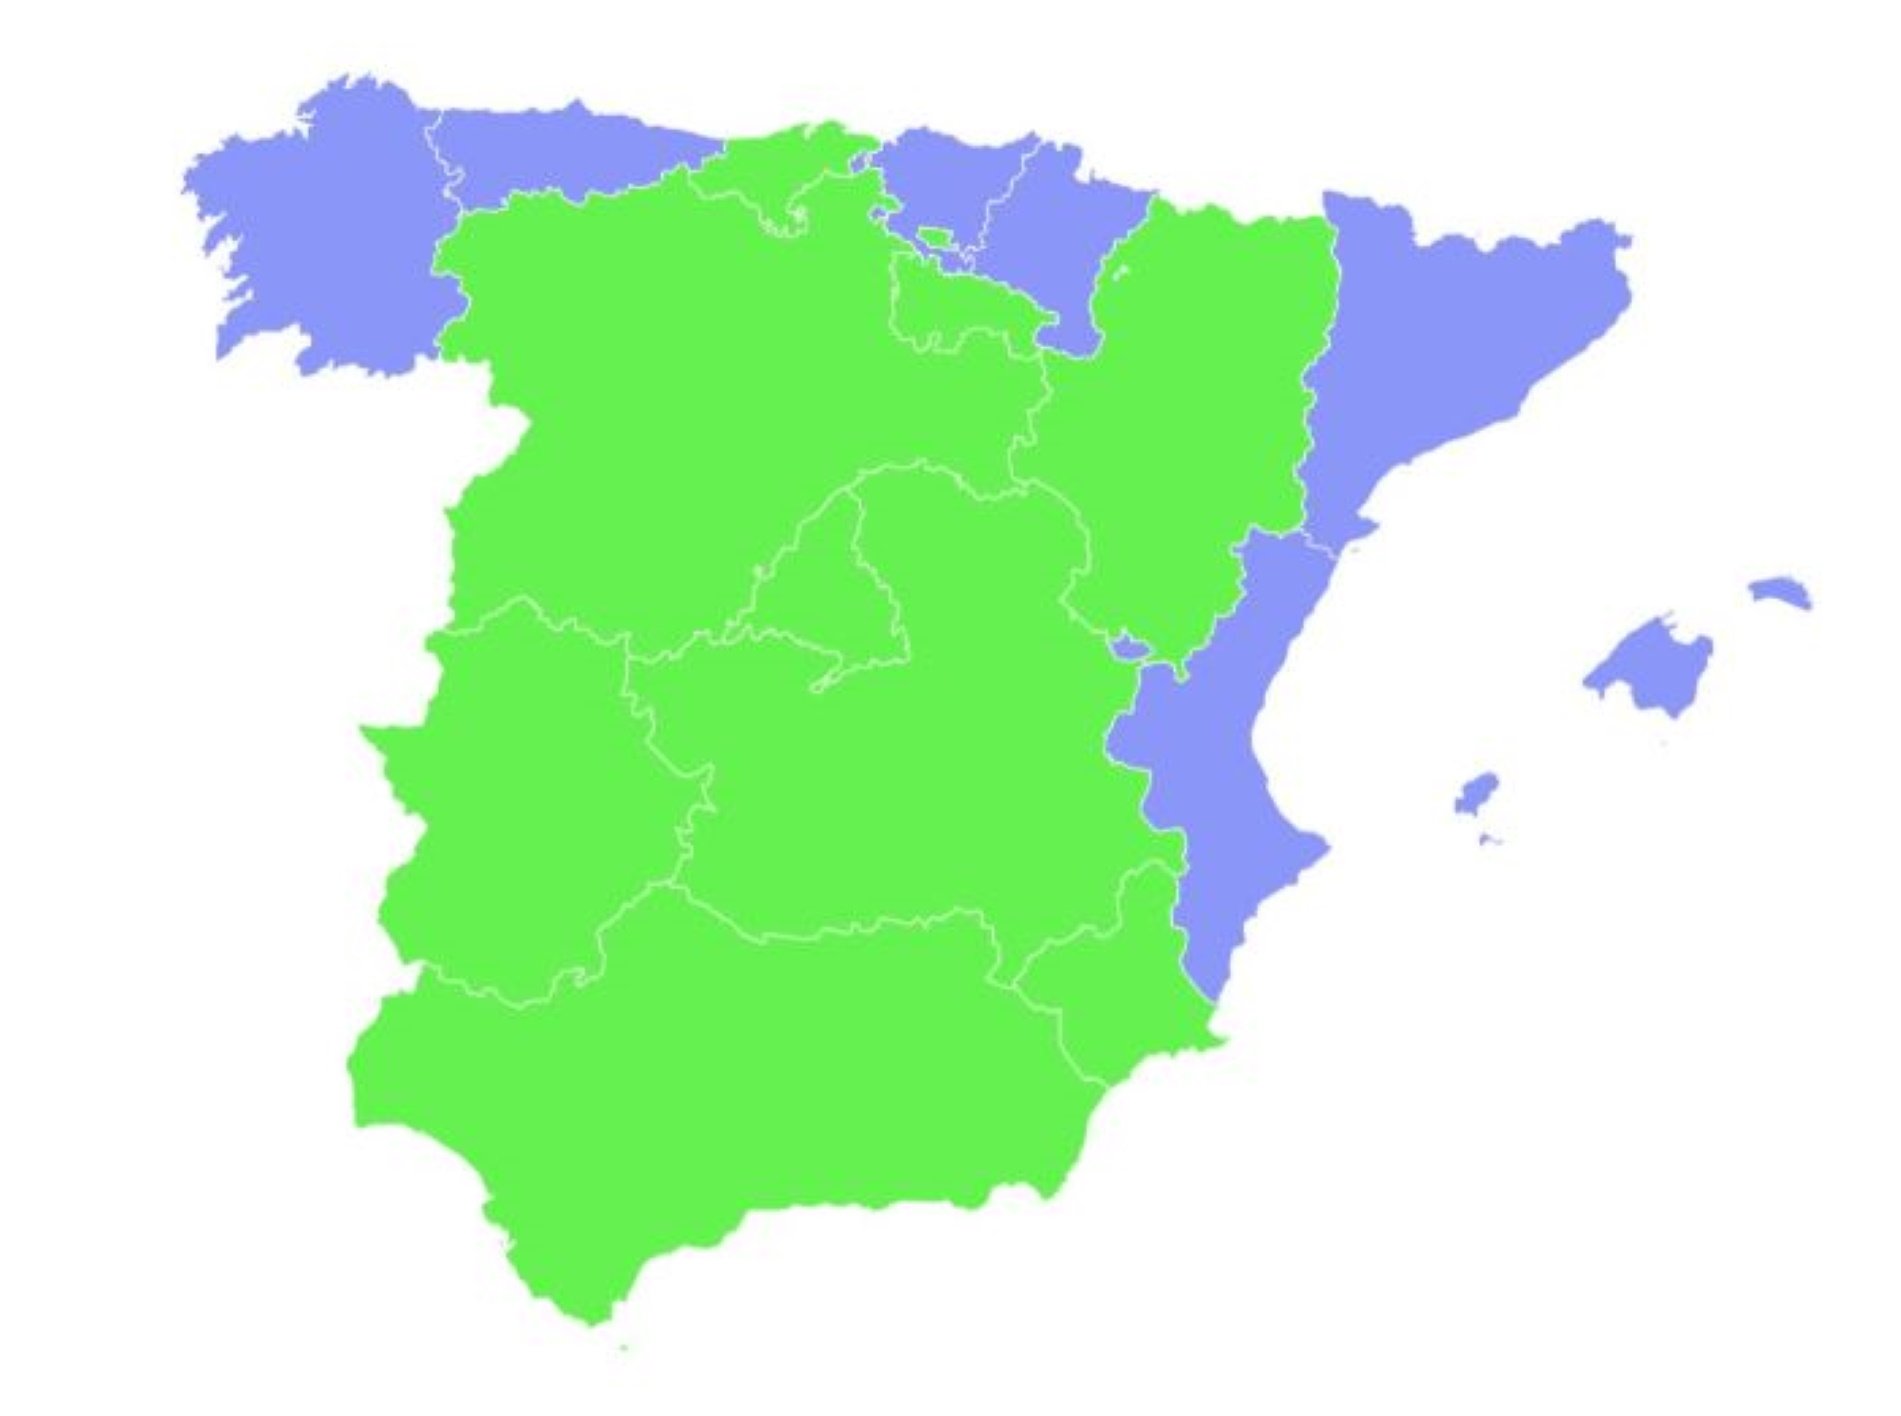 This would be the voting of each autonomous community if the choice were only Abascal or Puigdemont